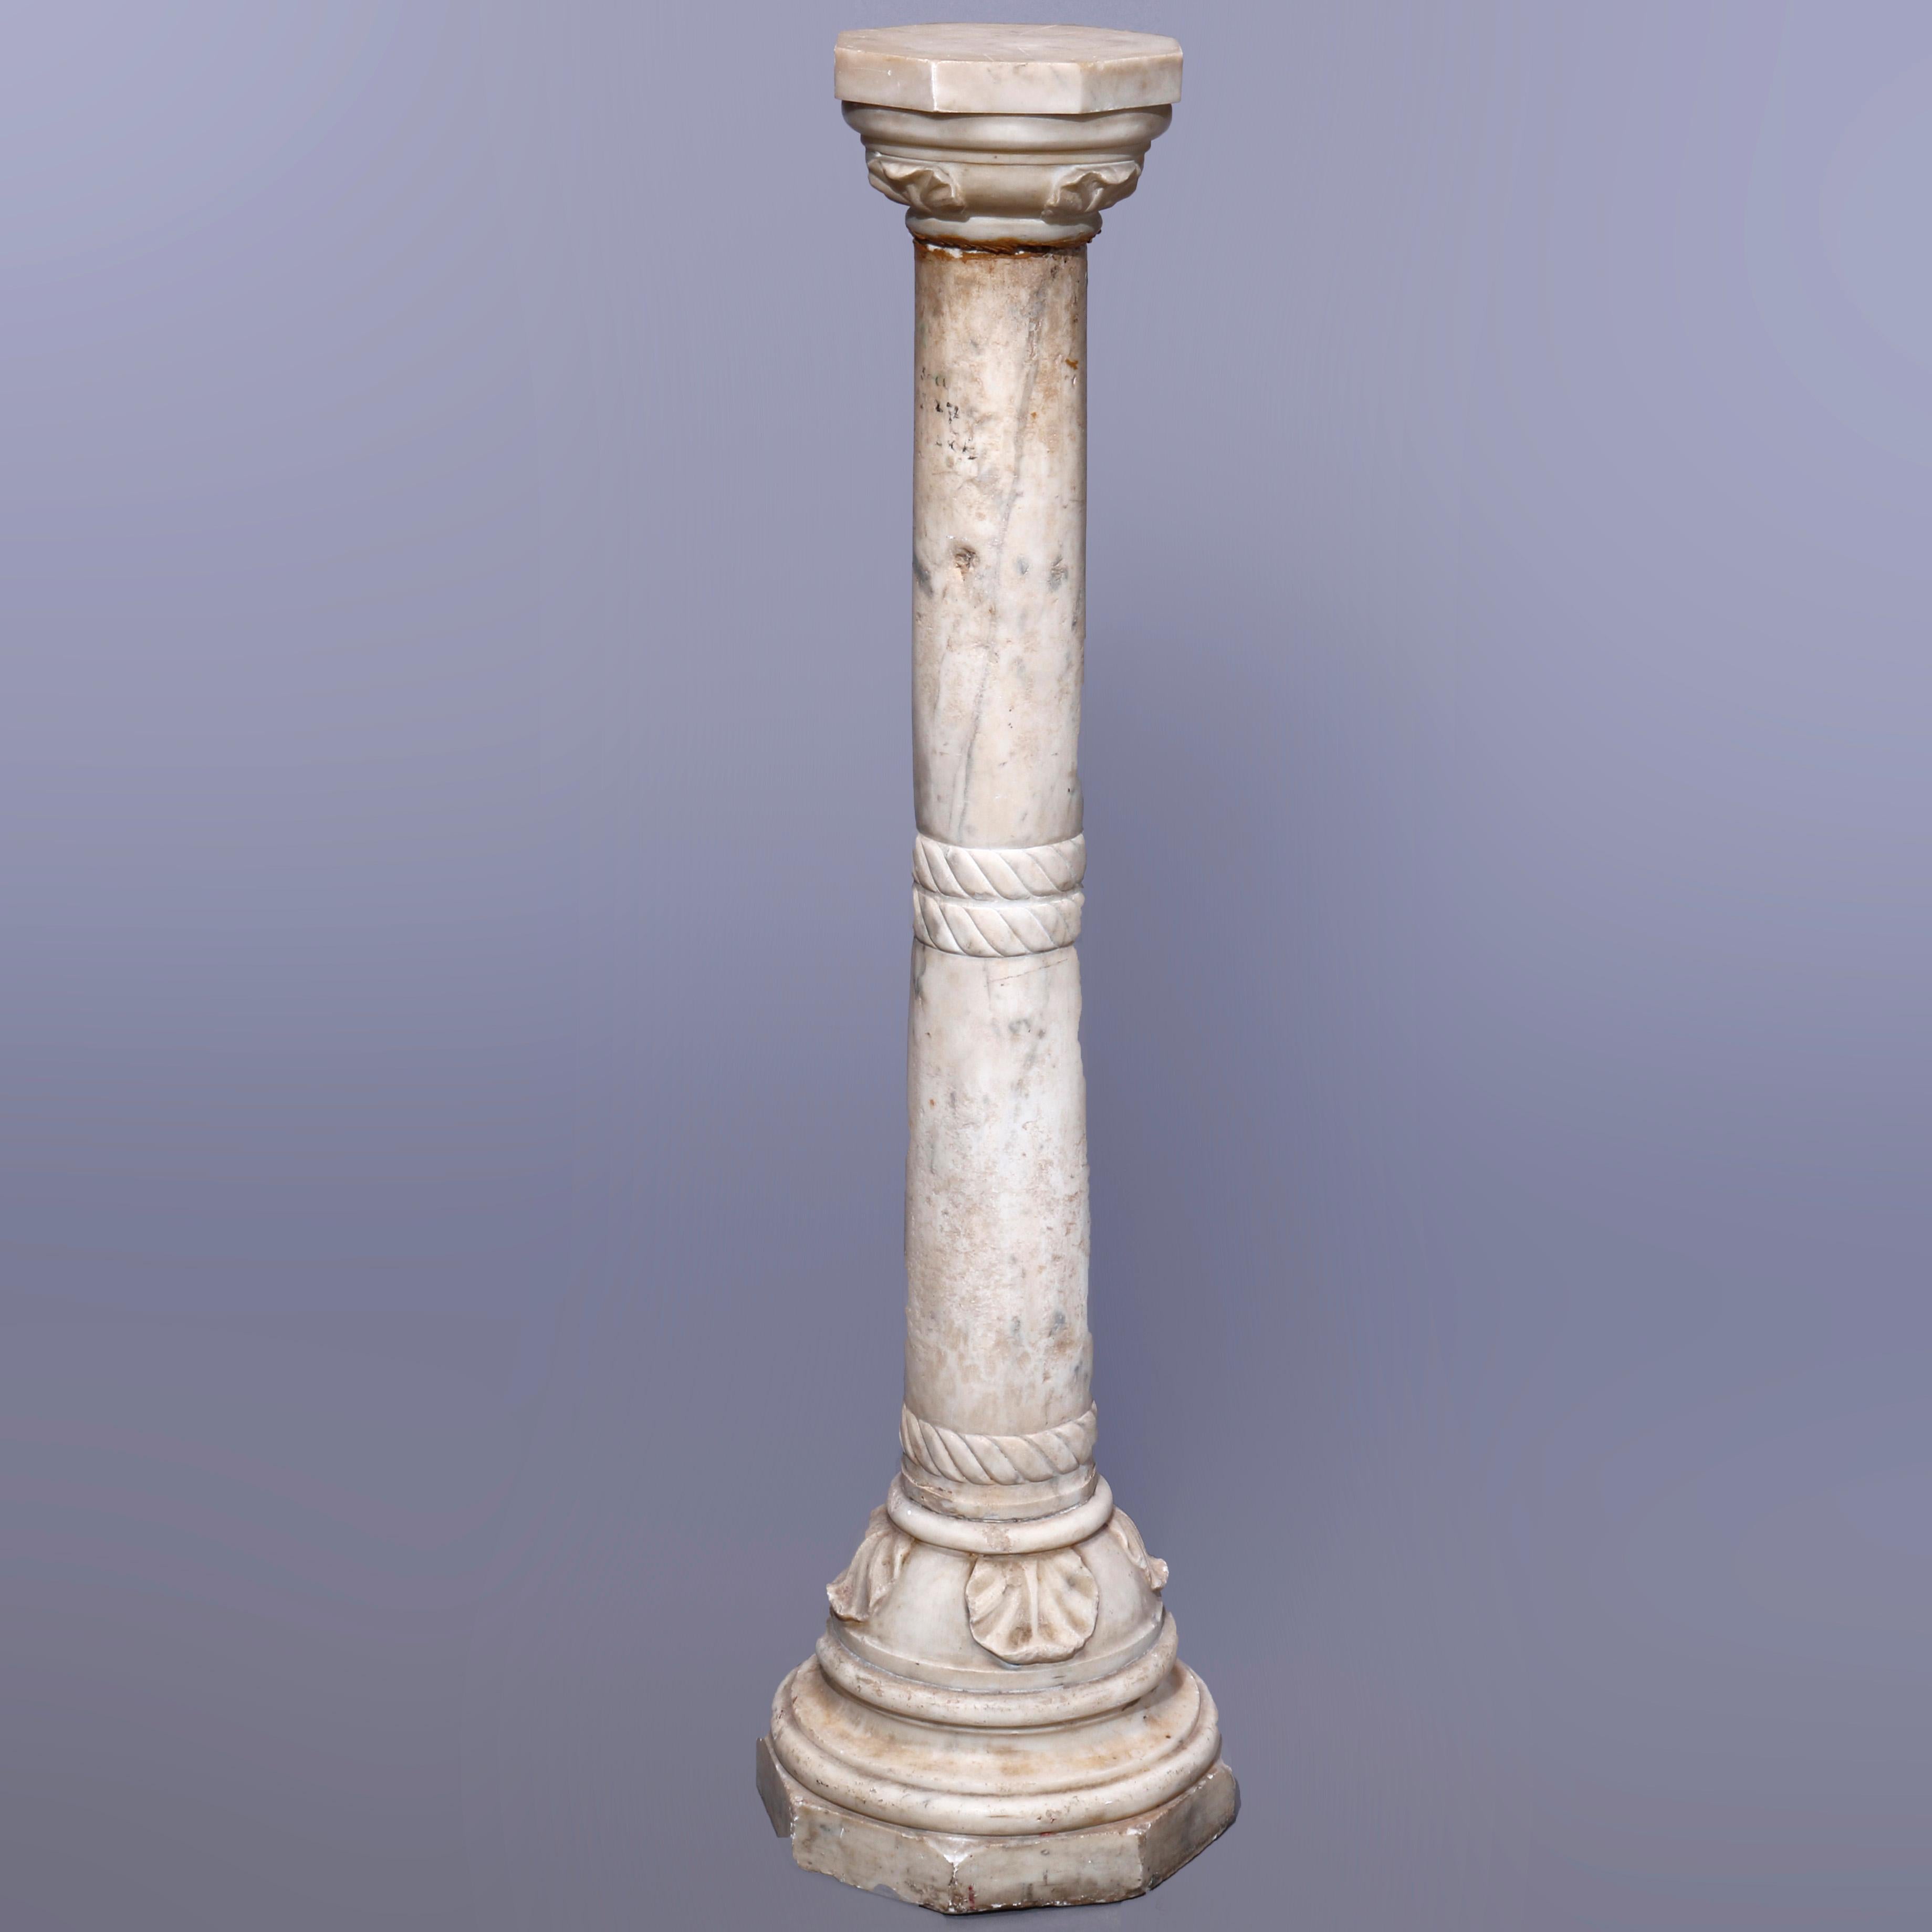 An antique neoclassical sculpture pedestal offers carved marble construction with octagonal display over turned and banded Doric column with carved acanthus foliate elements raised on flared base with octagonal foot, c1890

Measures - 48''h x